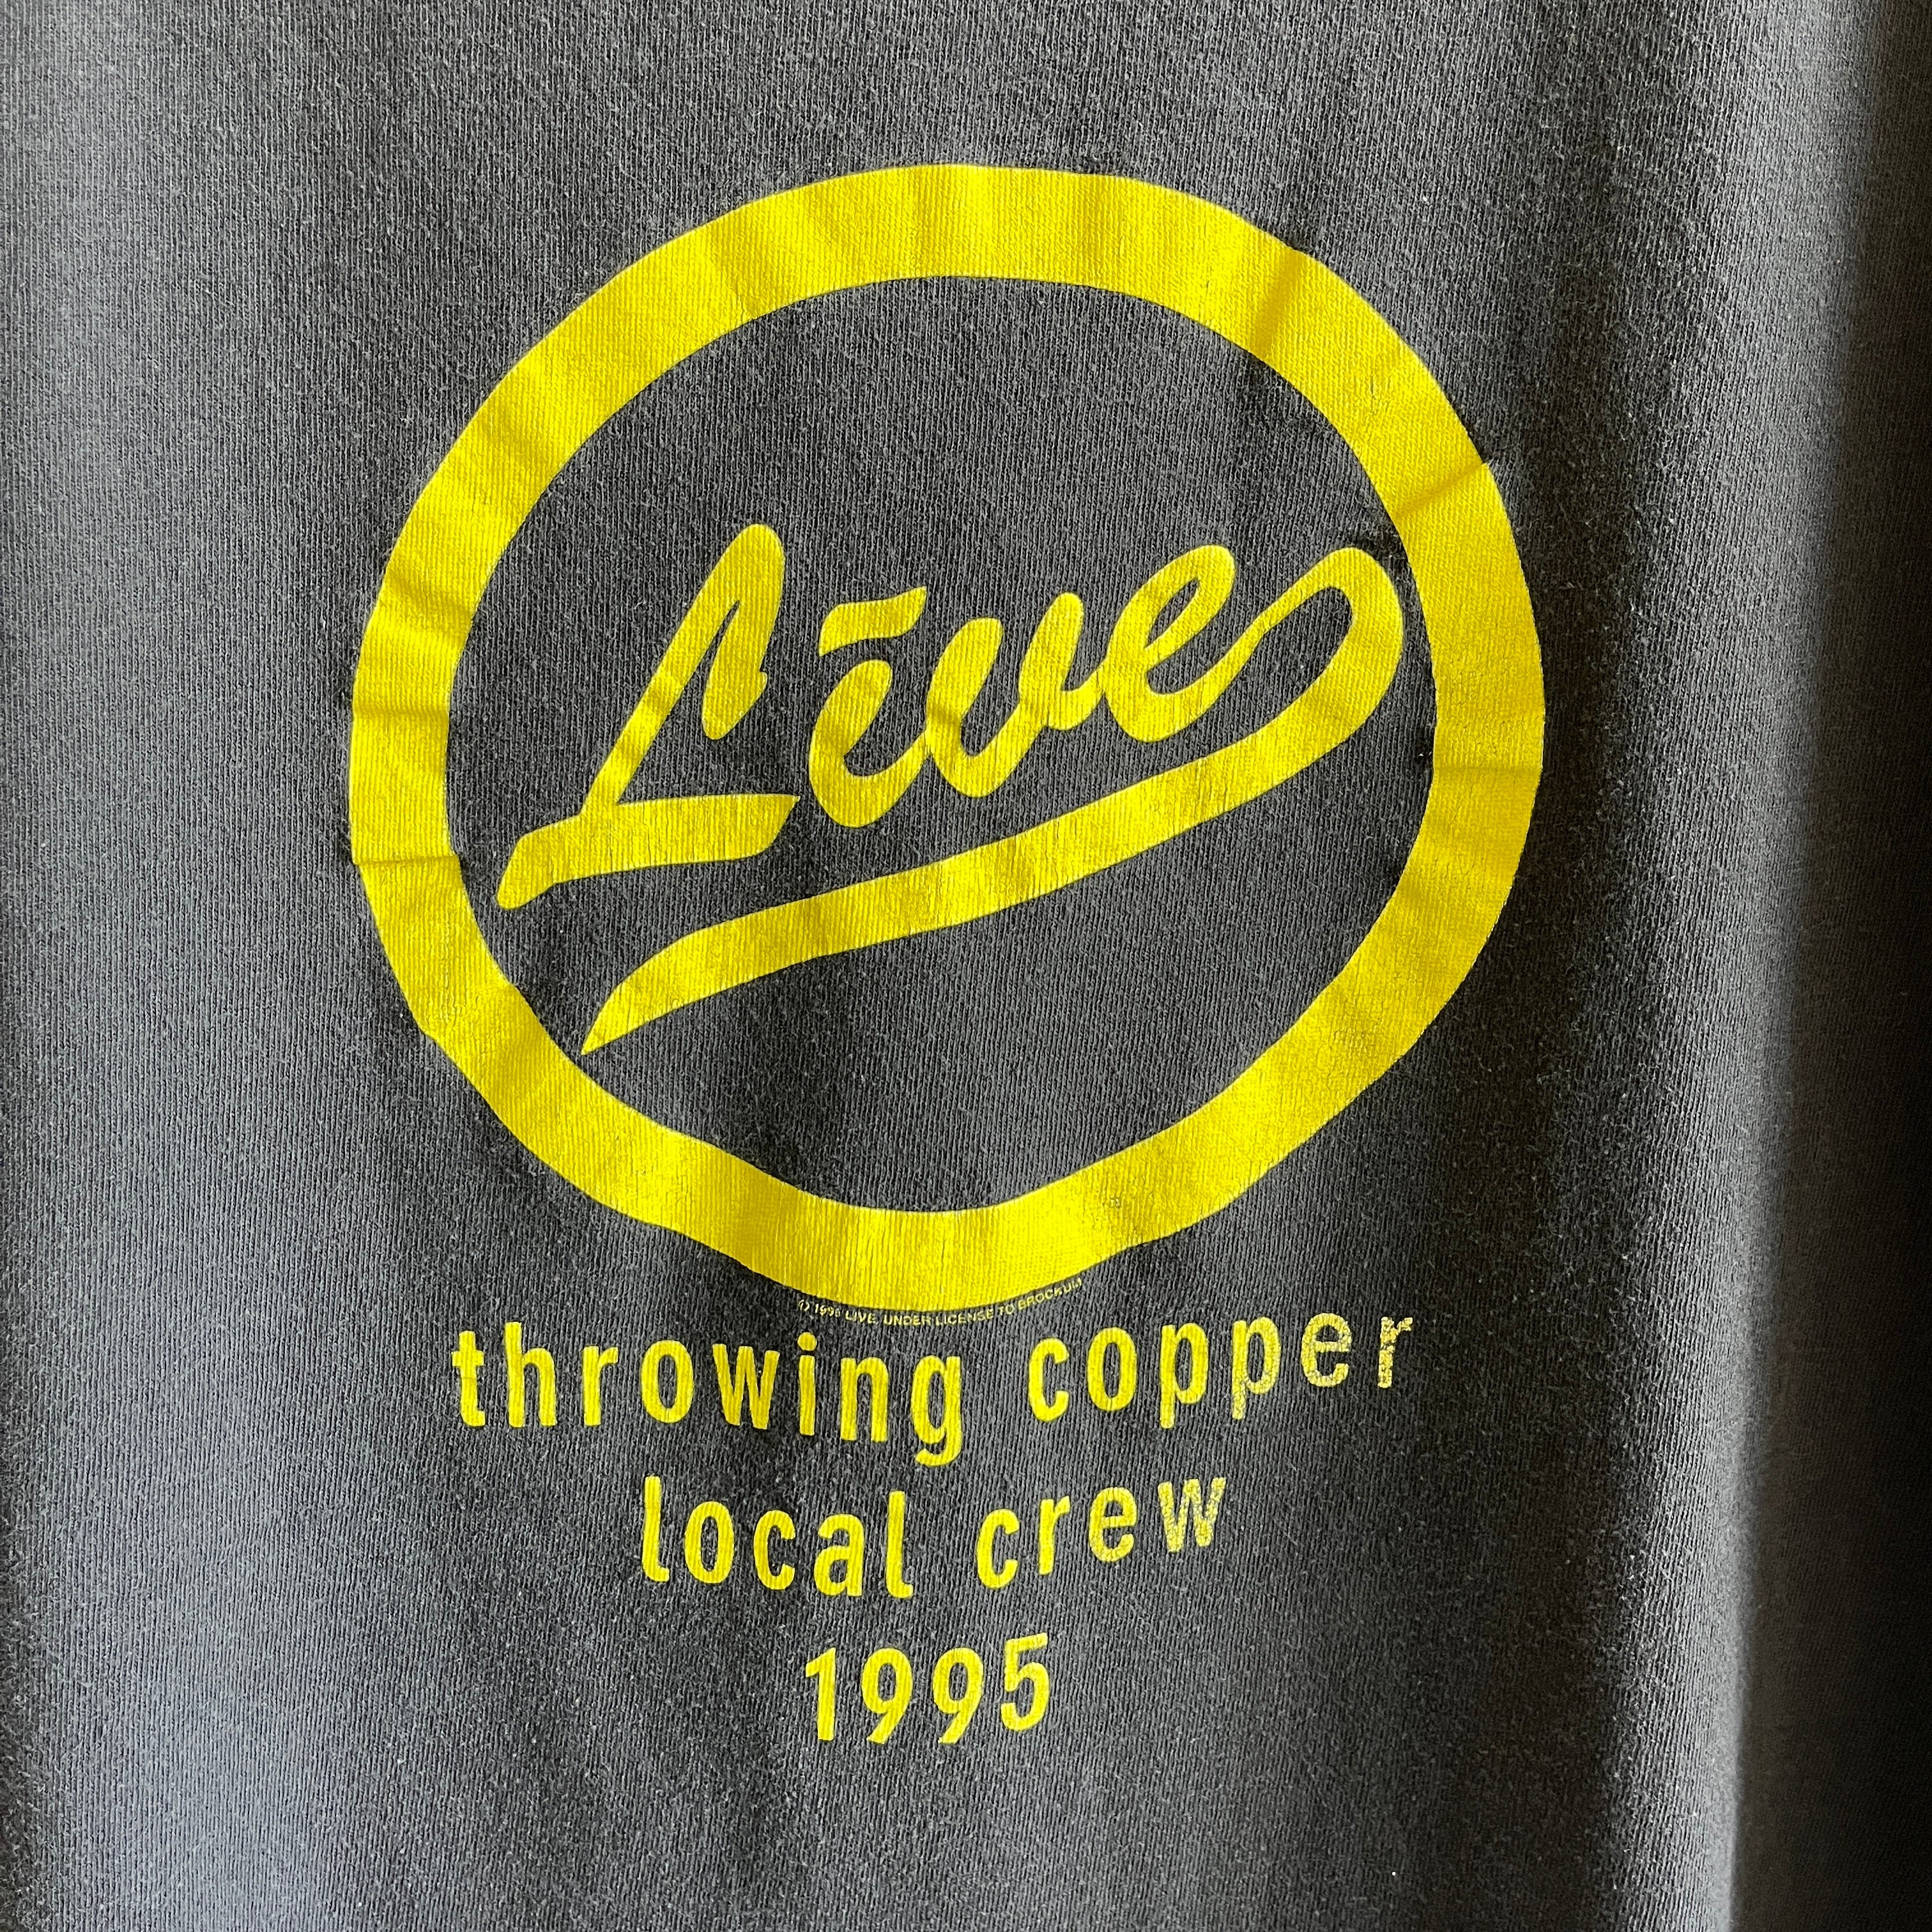 1995 T-shirt Live Throwing Copper Local Crew